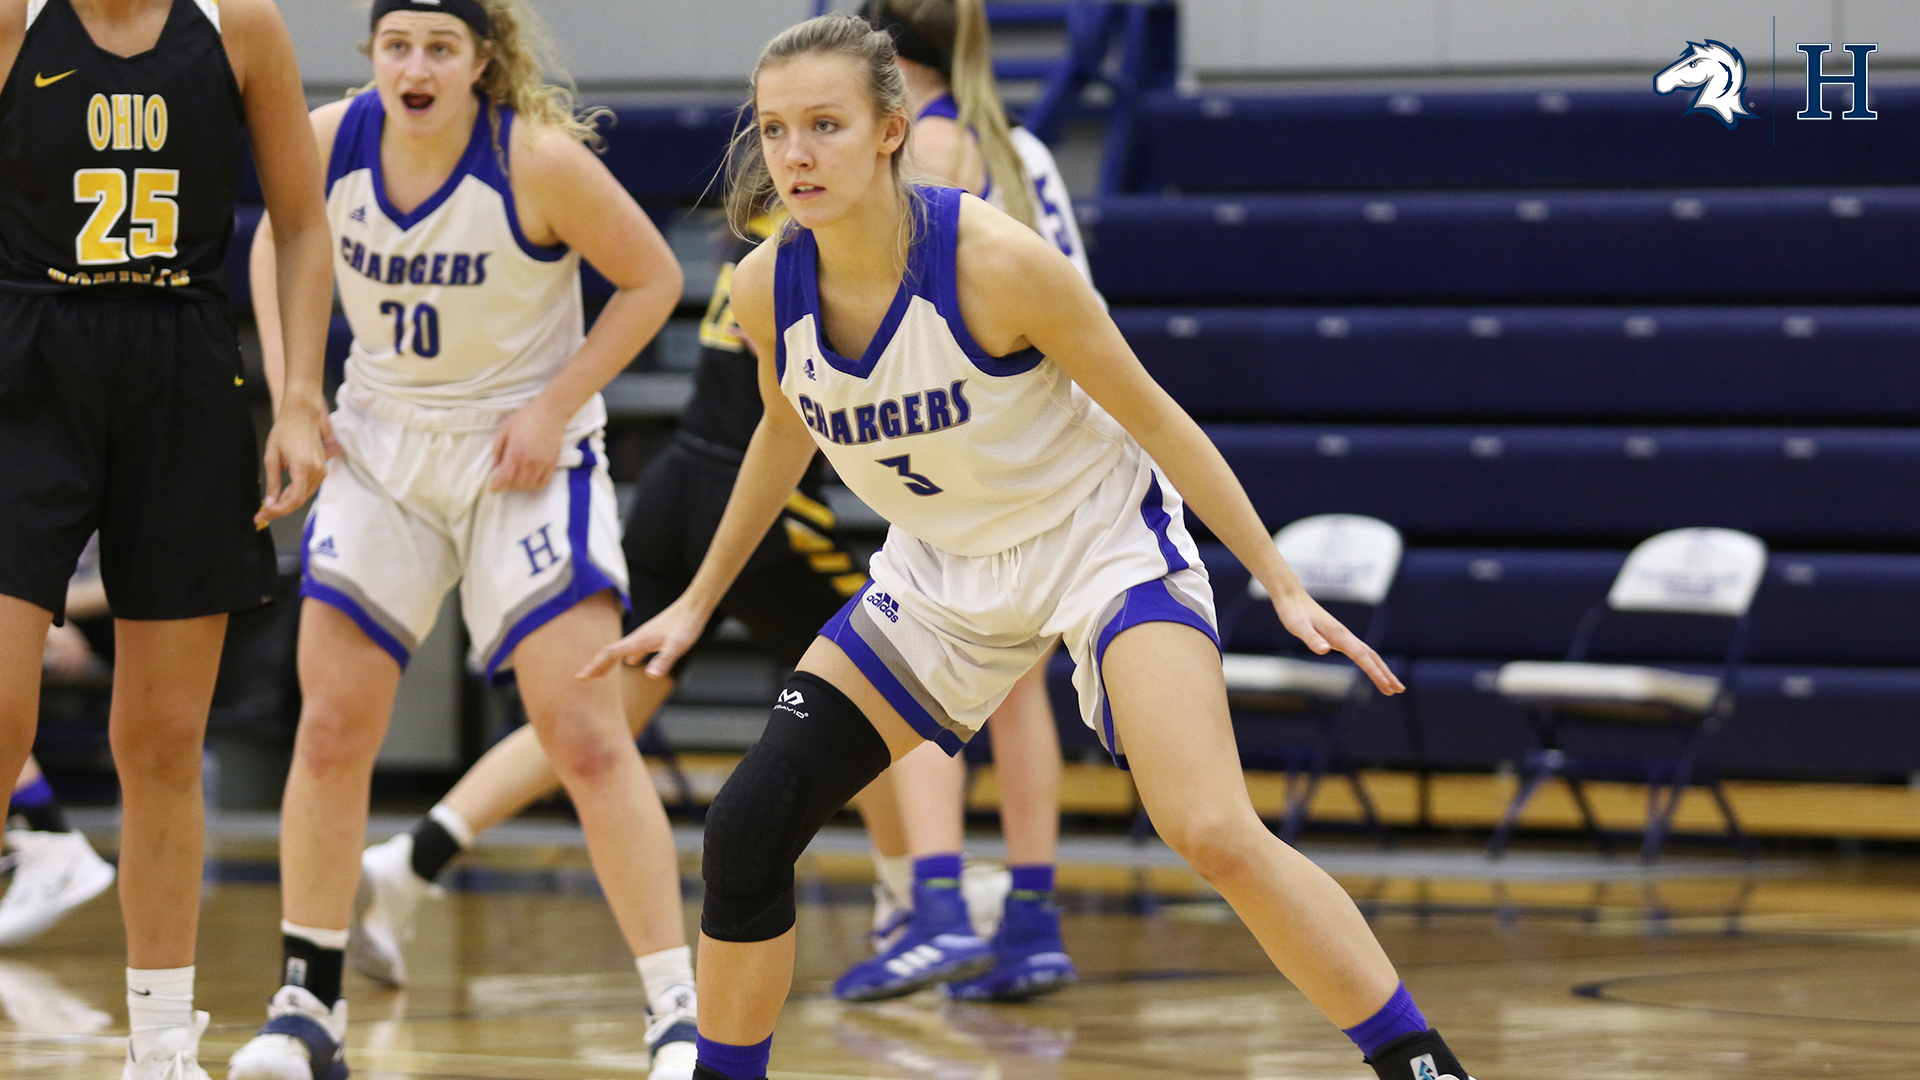 Charger women fall in second half to Tiffin, 81-73